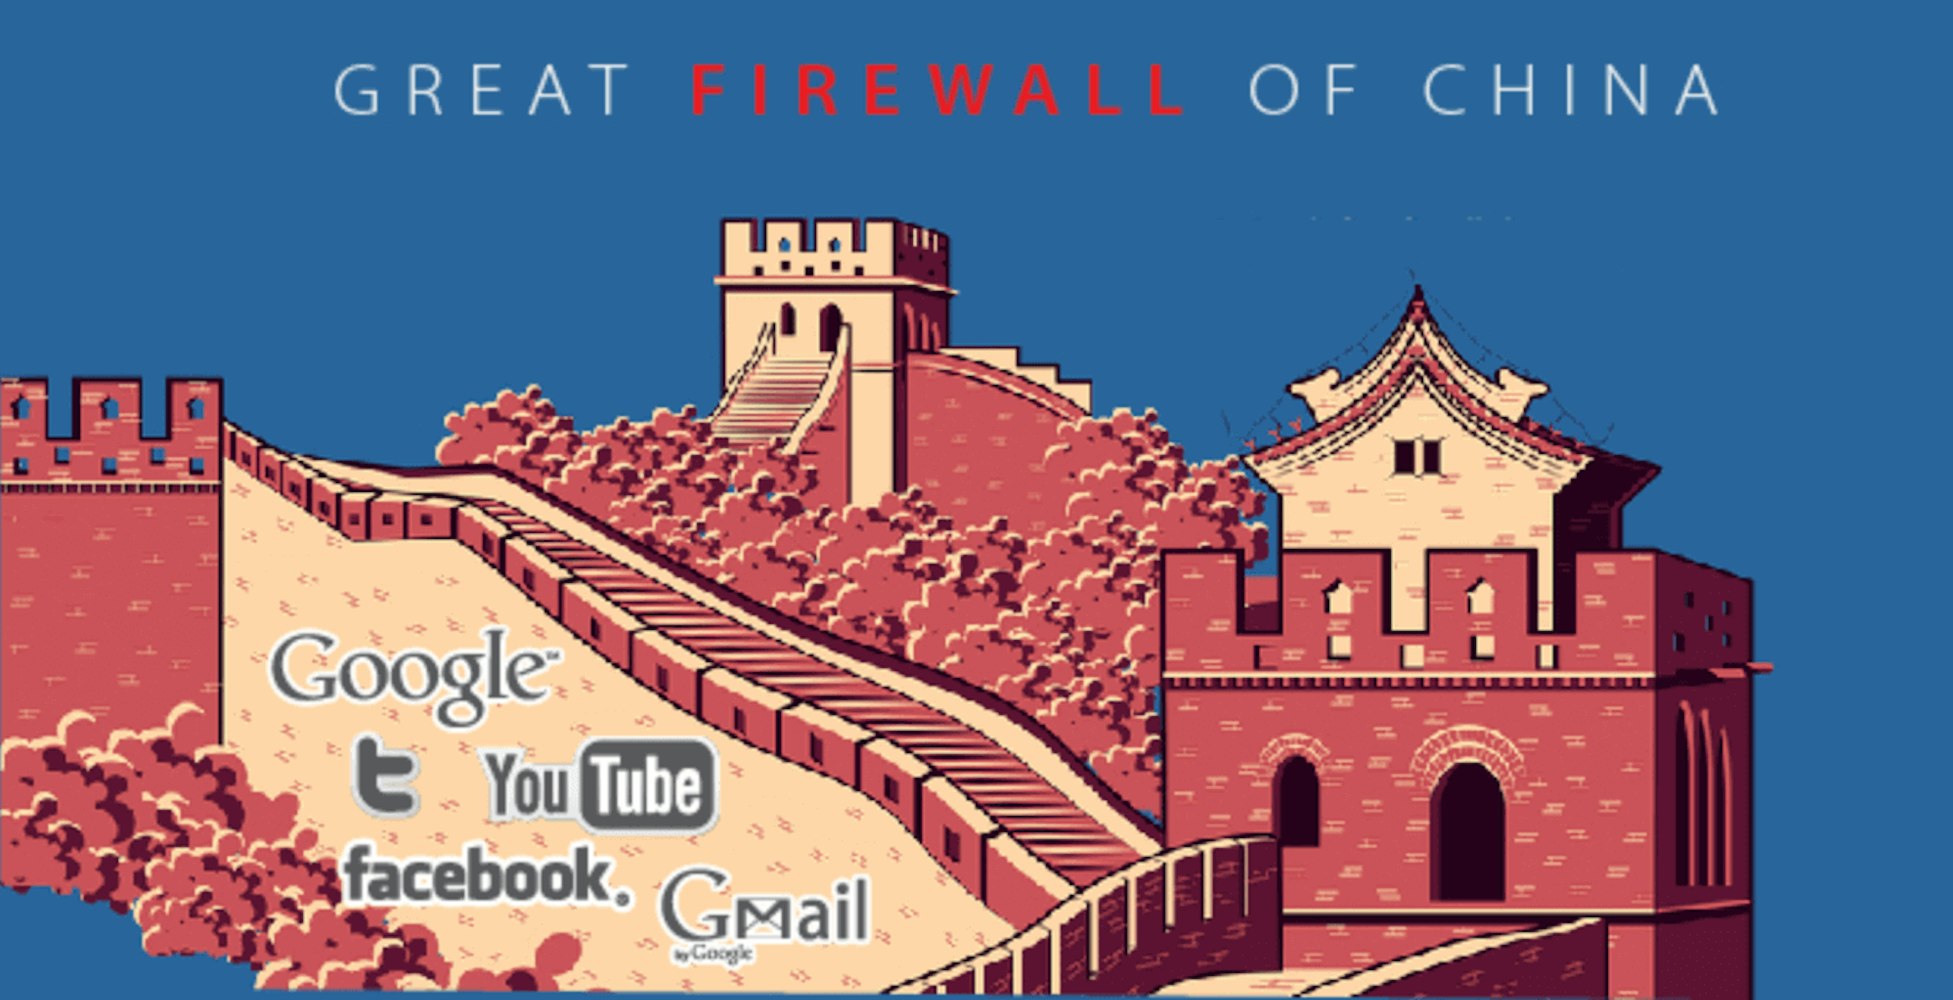 Great Firewall of China clipart image